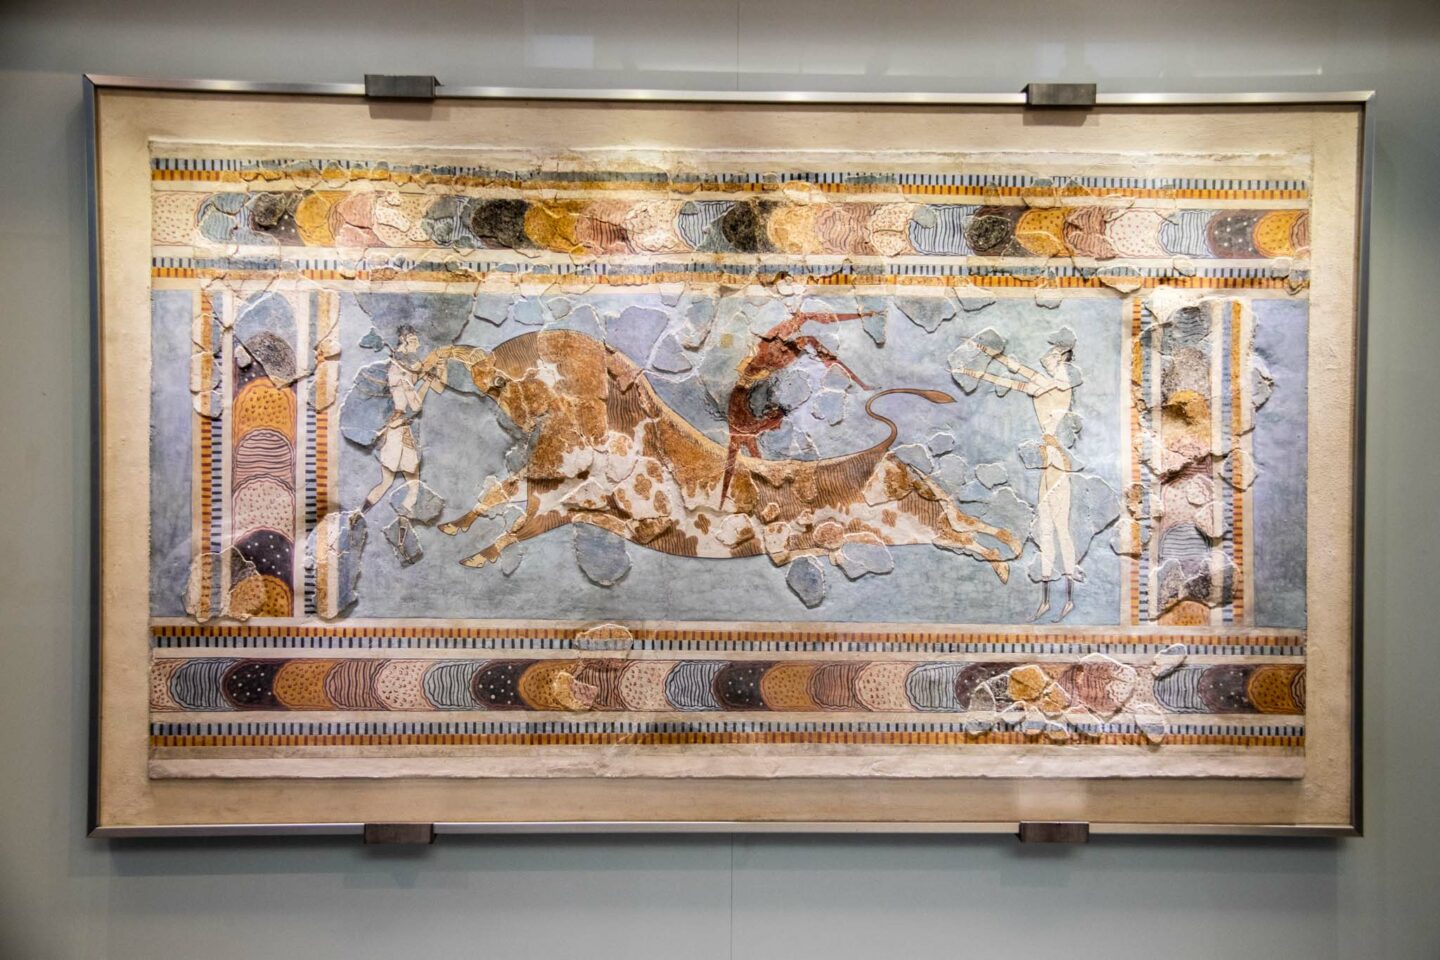 A surviving fresco from the palace of Knossos, depicting the sport of bull jumping. Now on display in the Heraklion Archaeological Museum.  